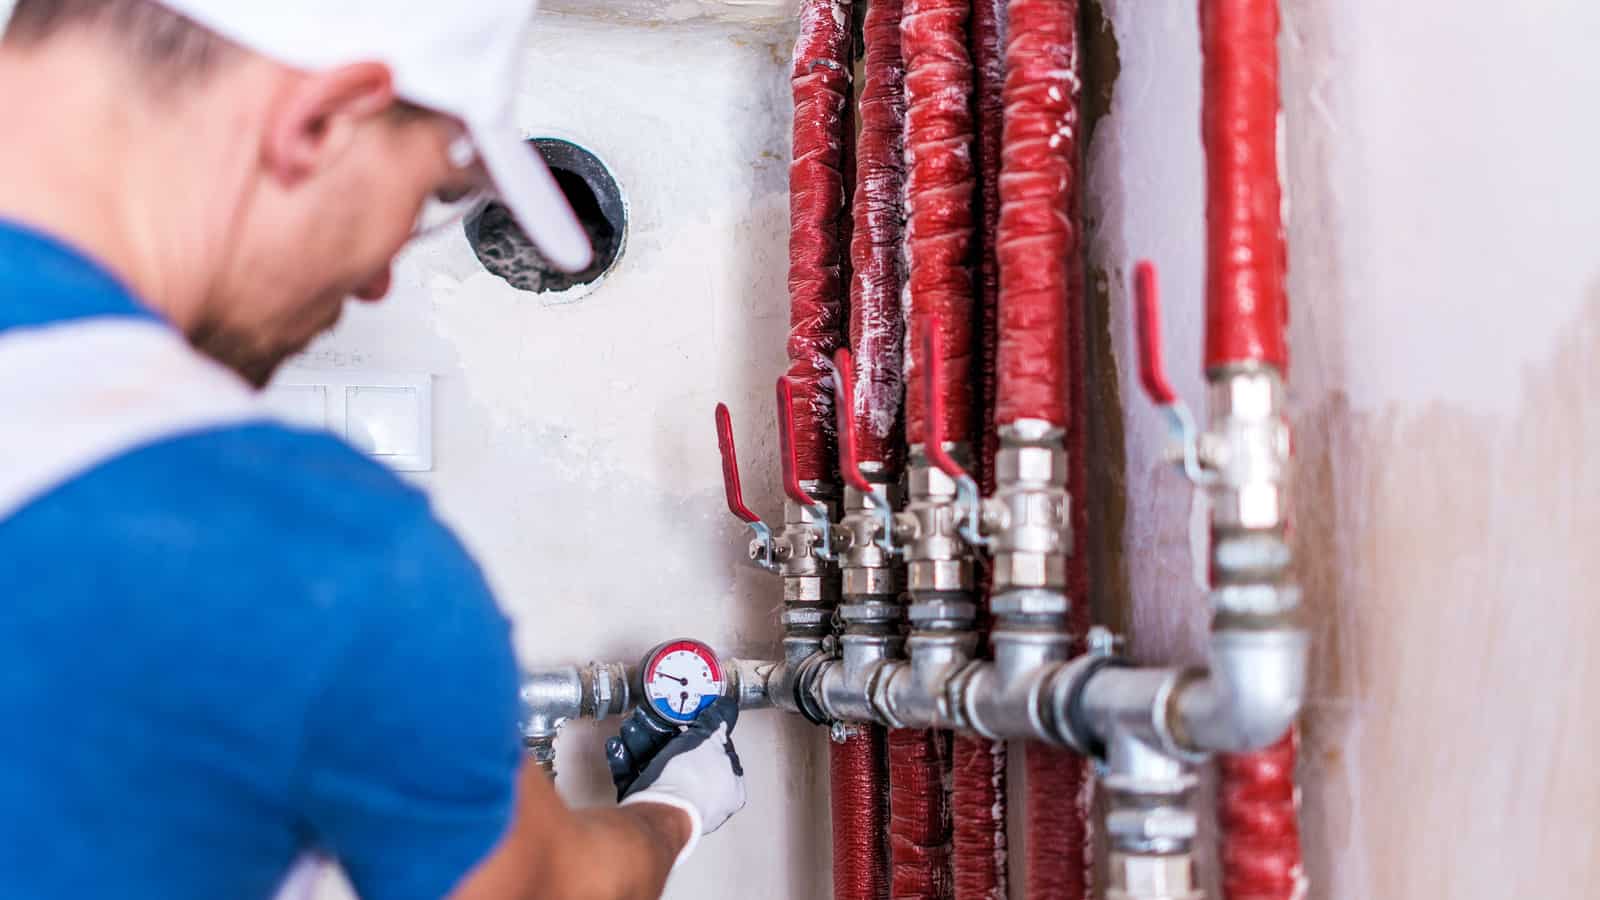 Psp Plumbing And Sewer Inc of Chicago